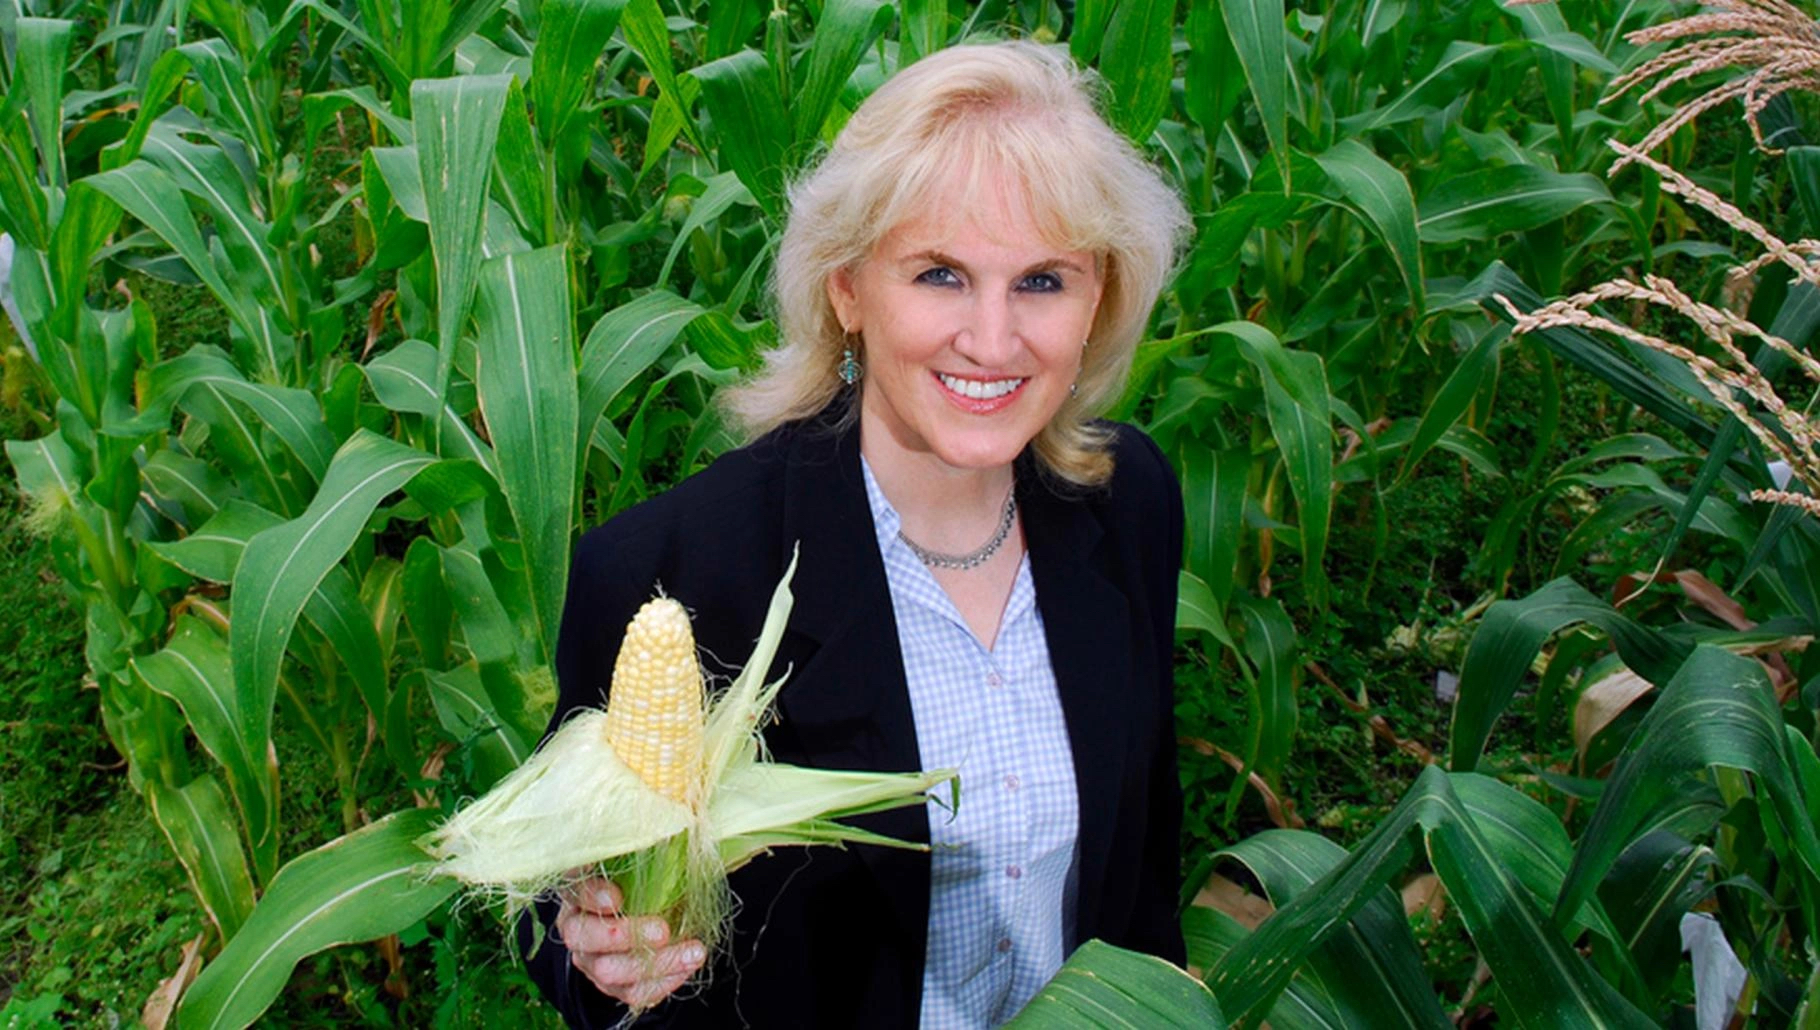 A blonde woman standing in a cornfield faces the camera, holding an ear of corn.